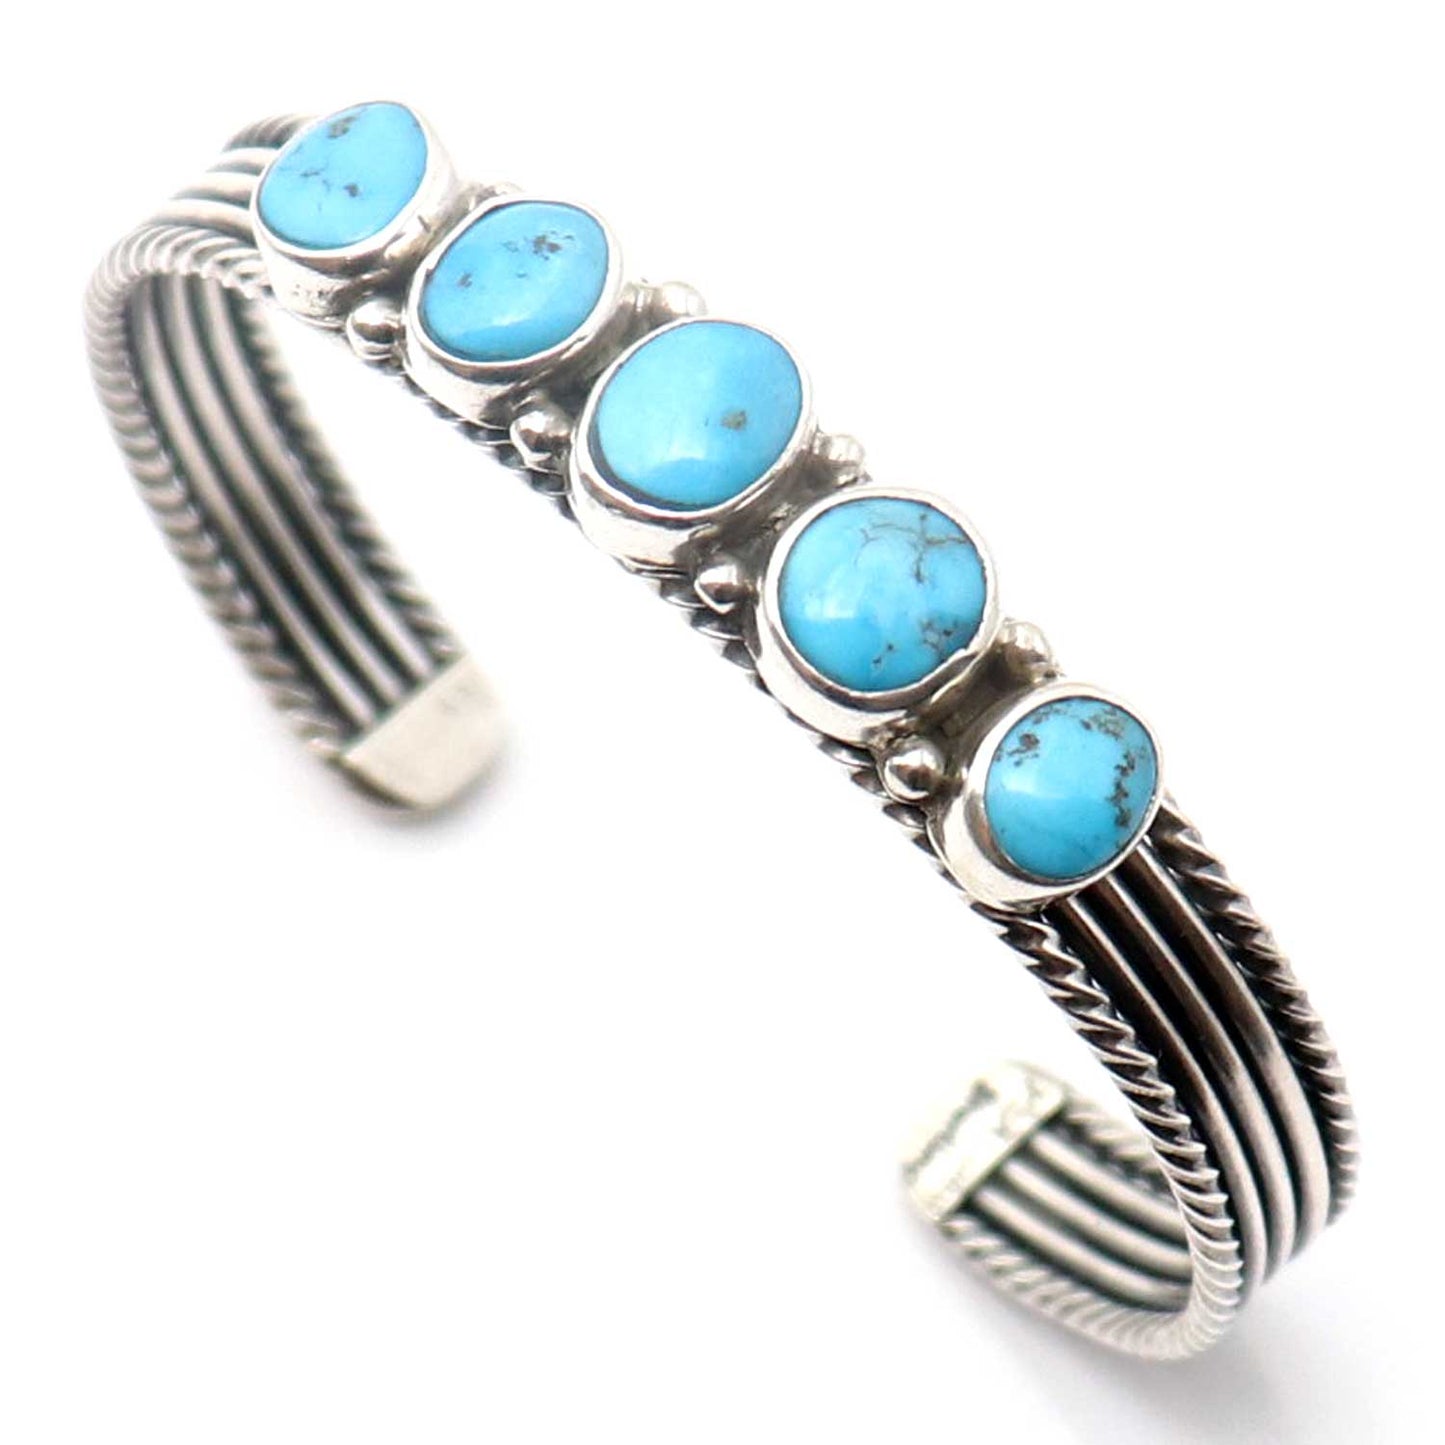 Load image into Gallery viewer, 5 Stone Turquoise and Silver Bracelet
